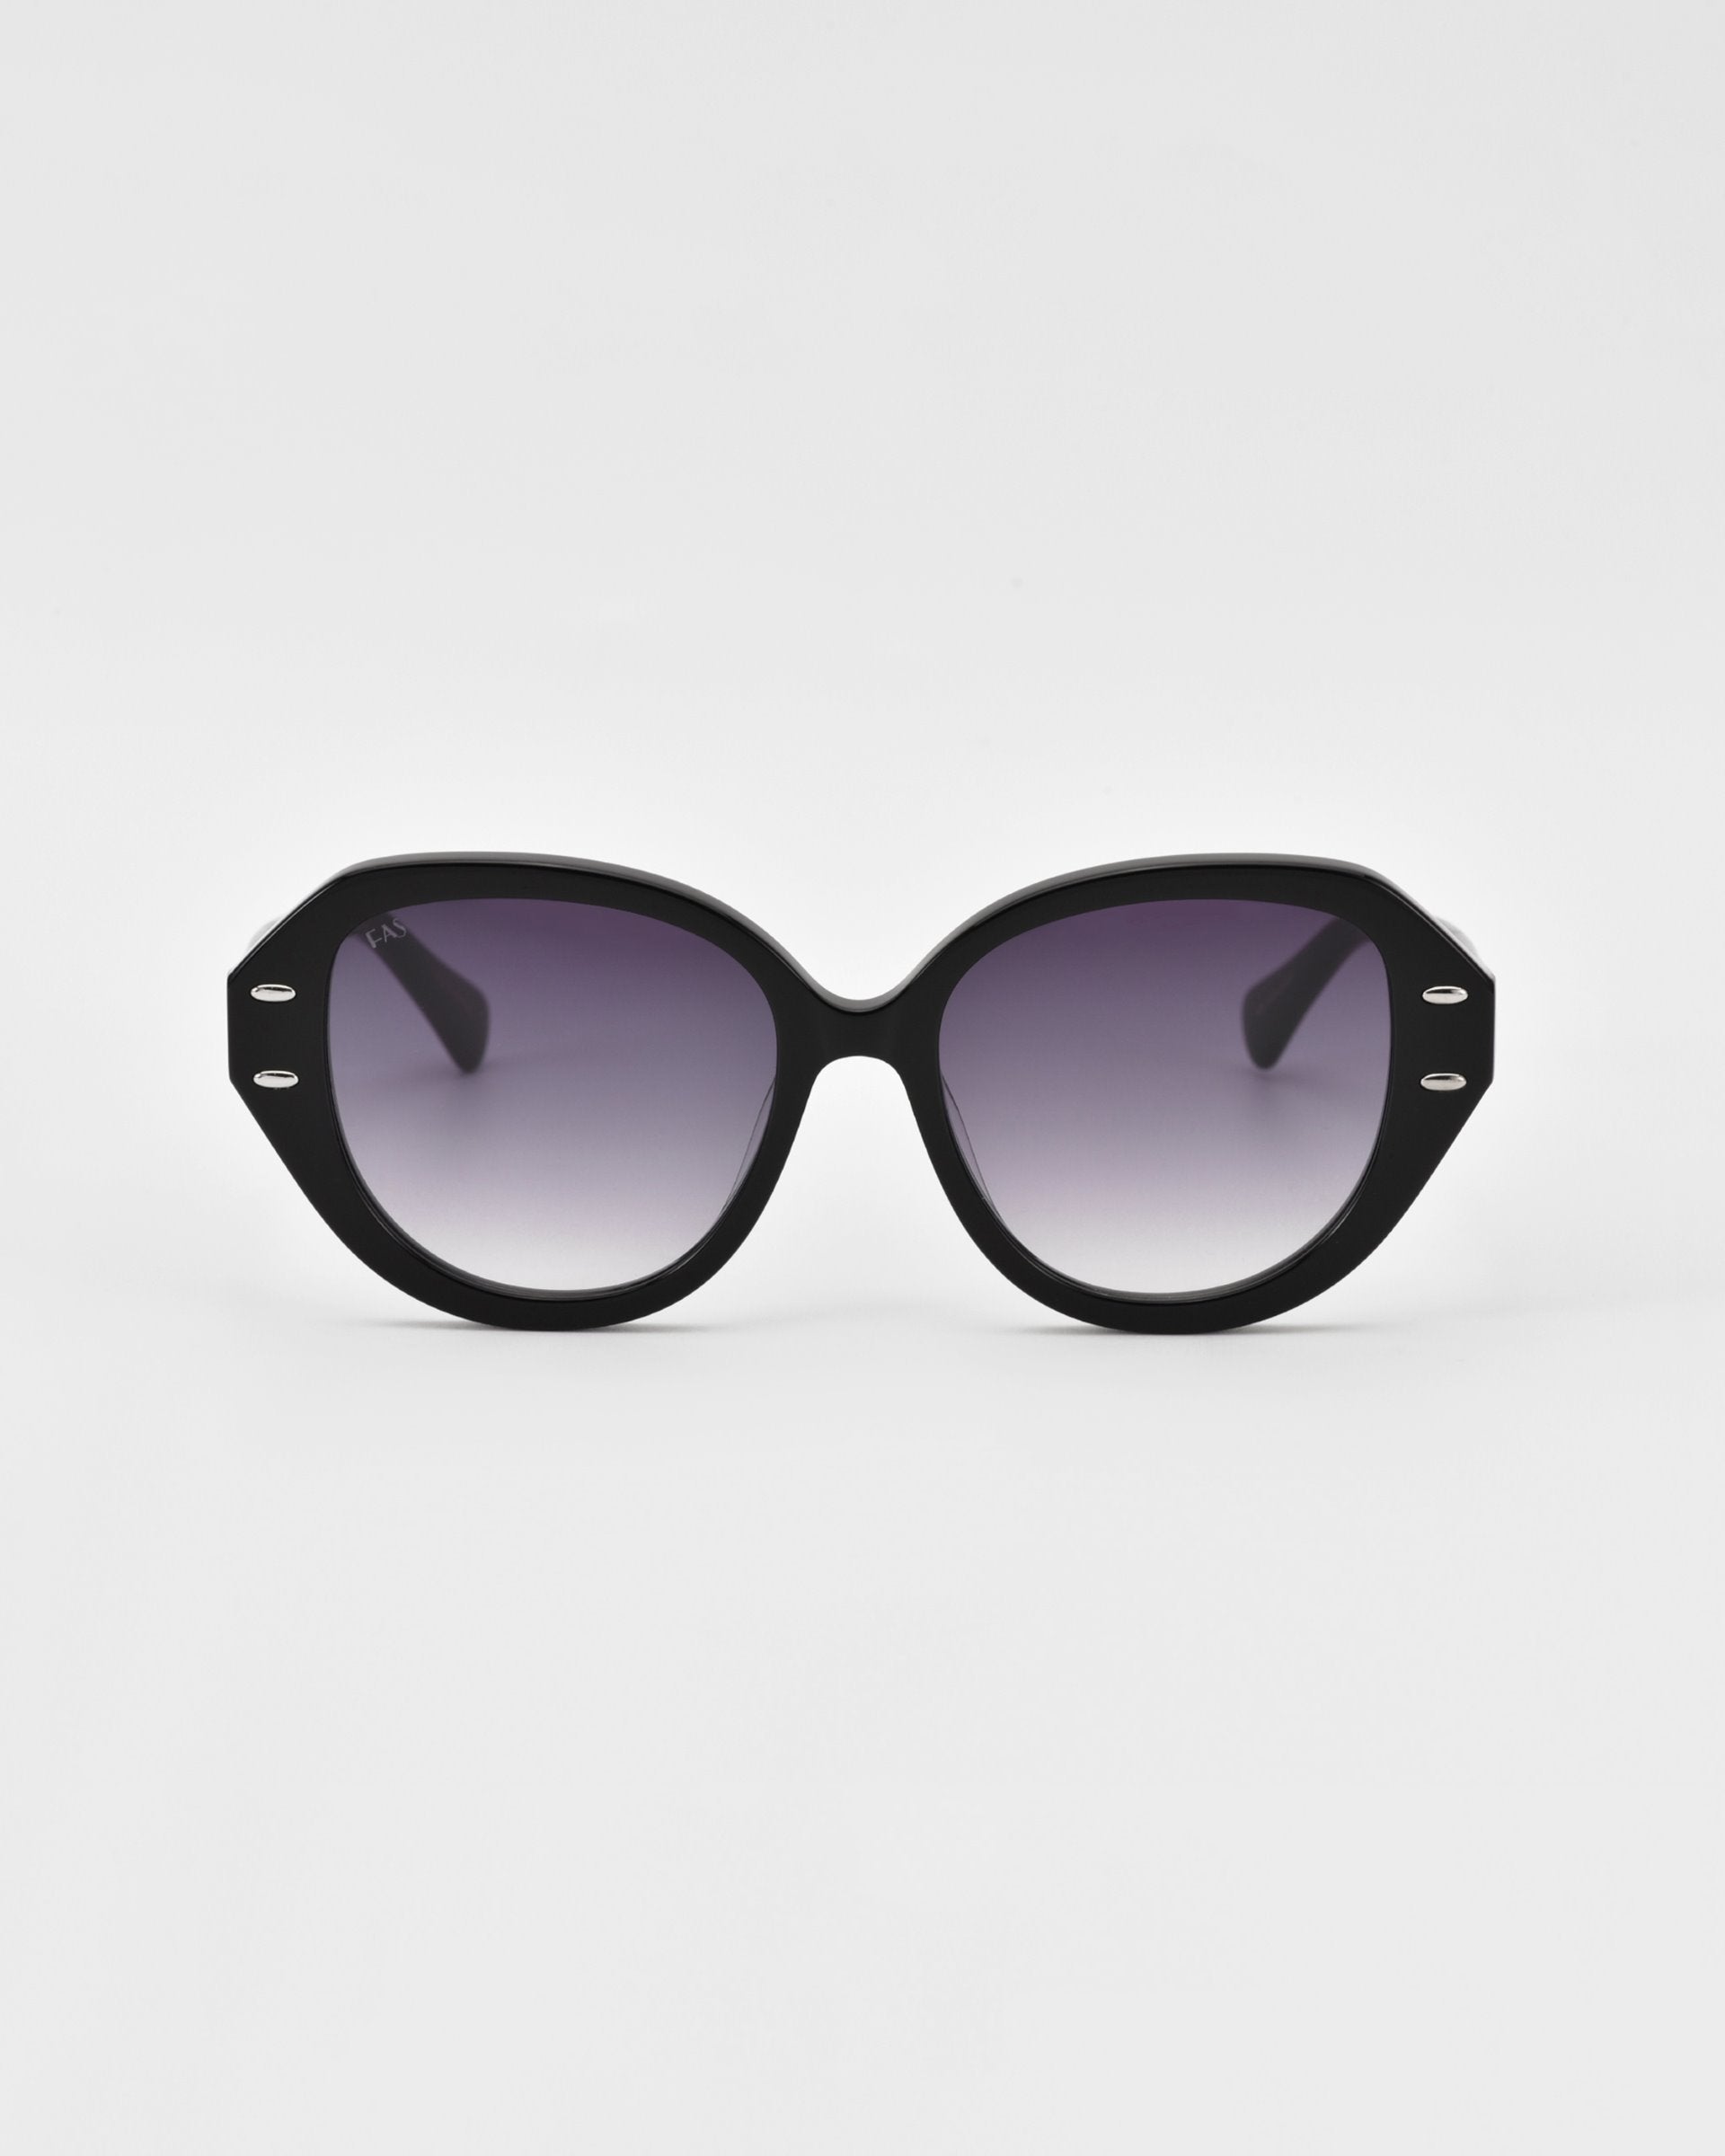 A pair of black oversized cat-eye Mirage sunglasses from For Art's Sake® with dark gradient lenses and silver accents on the temples. The frame, crafted from plant-based acetate, boasts a slightly geometric shape and is set against a plain white background.